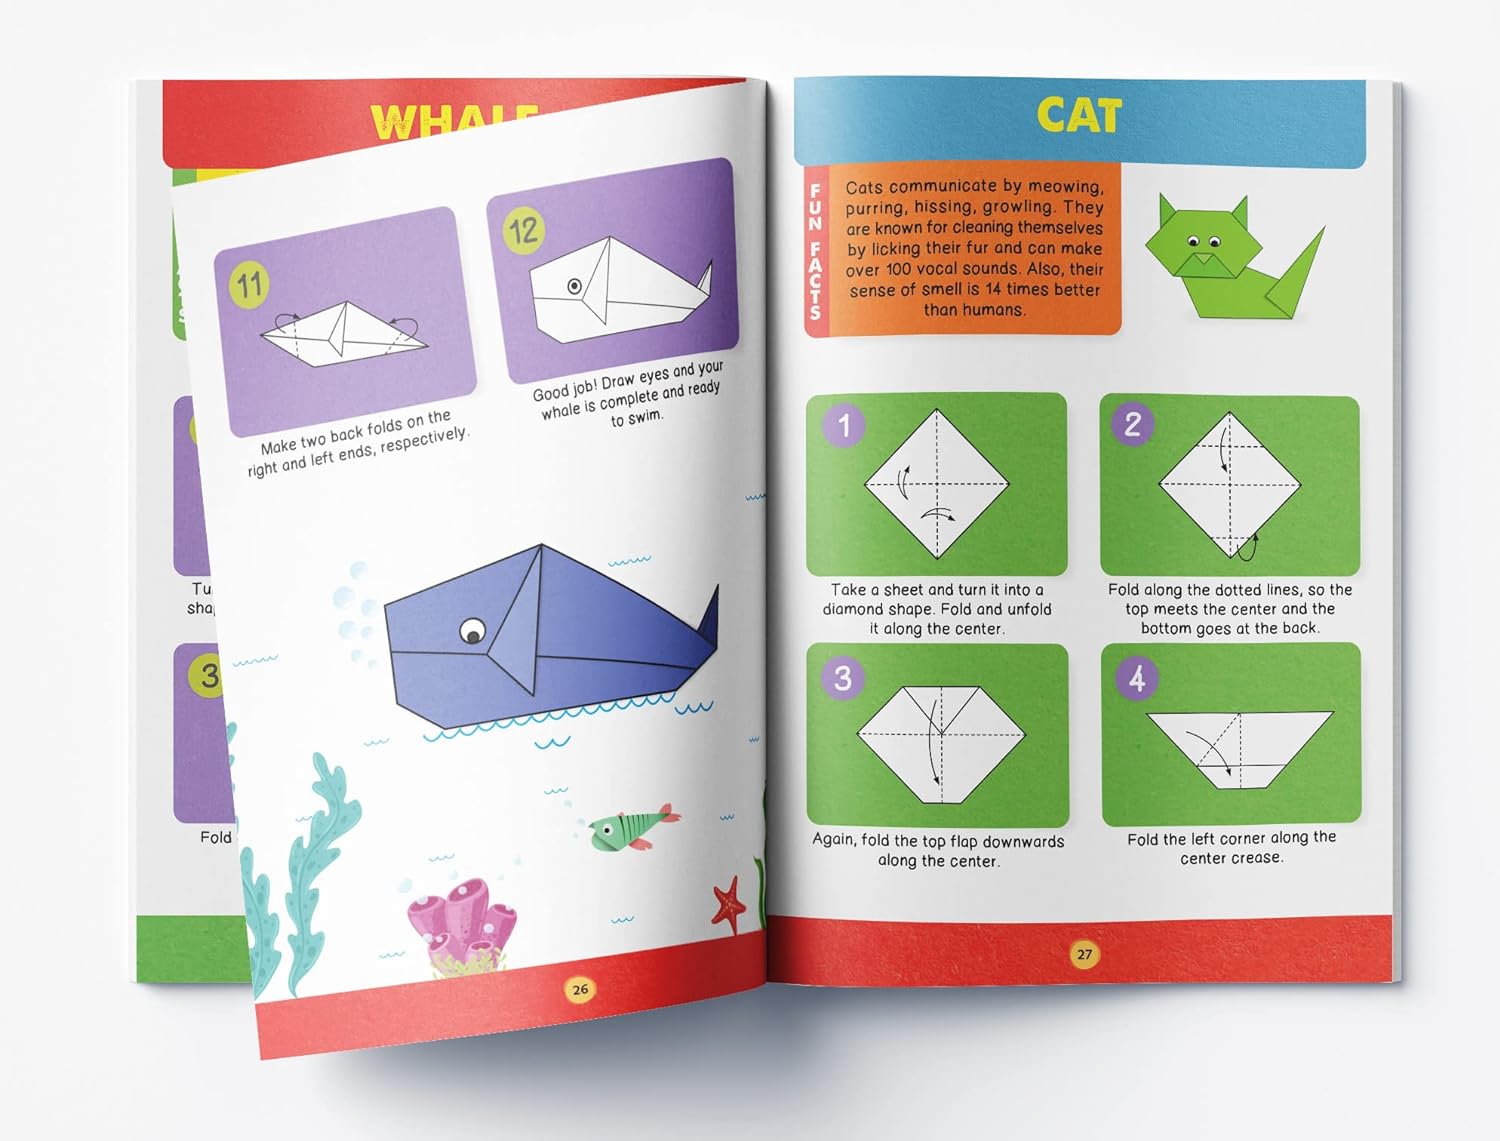 Origami - The Art of Paper-Folding - Activity Book For Children Level - 2